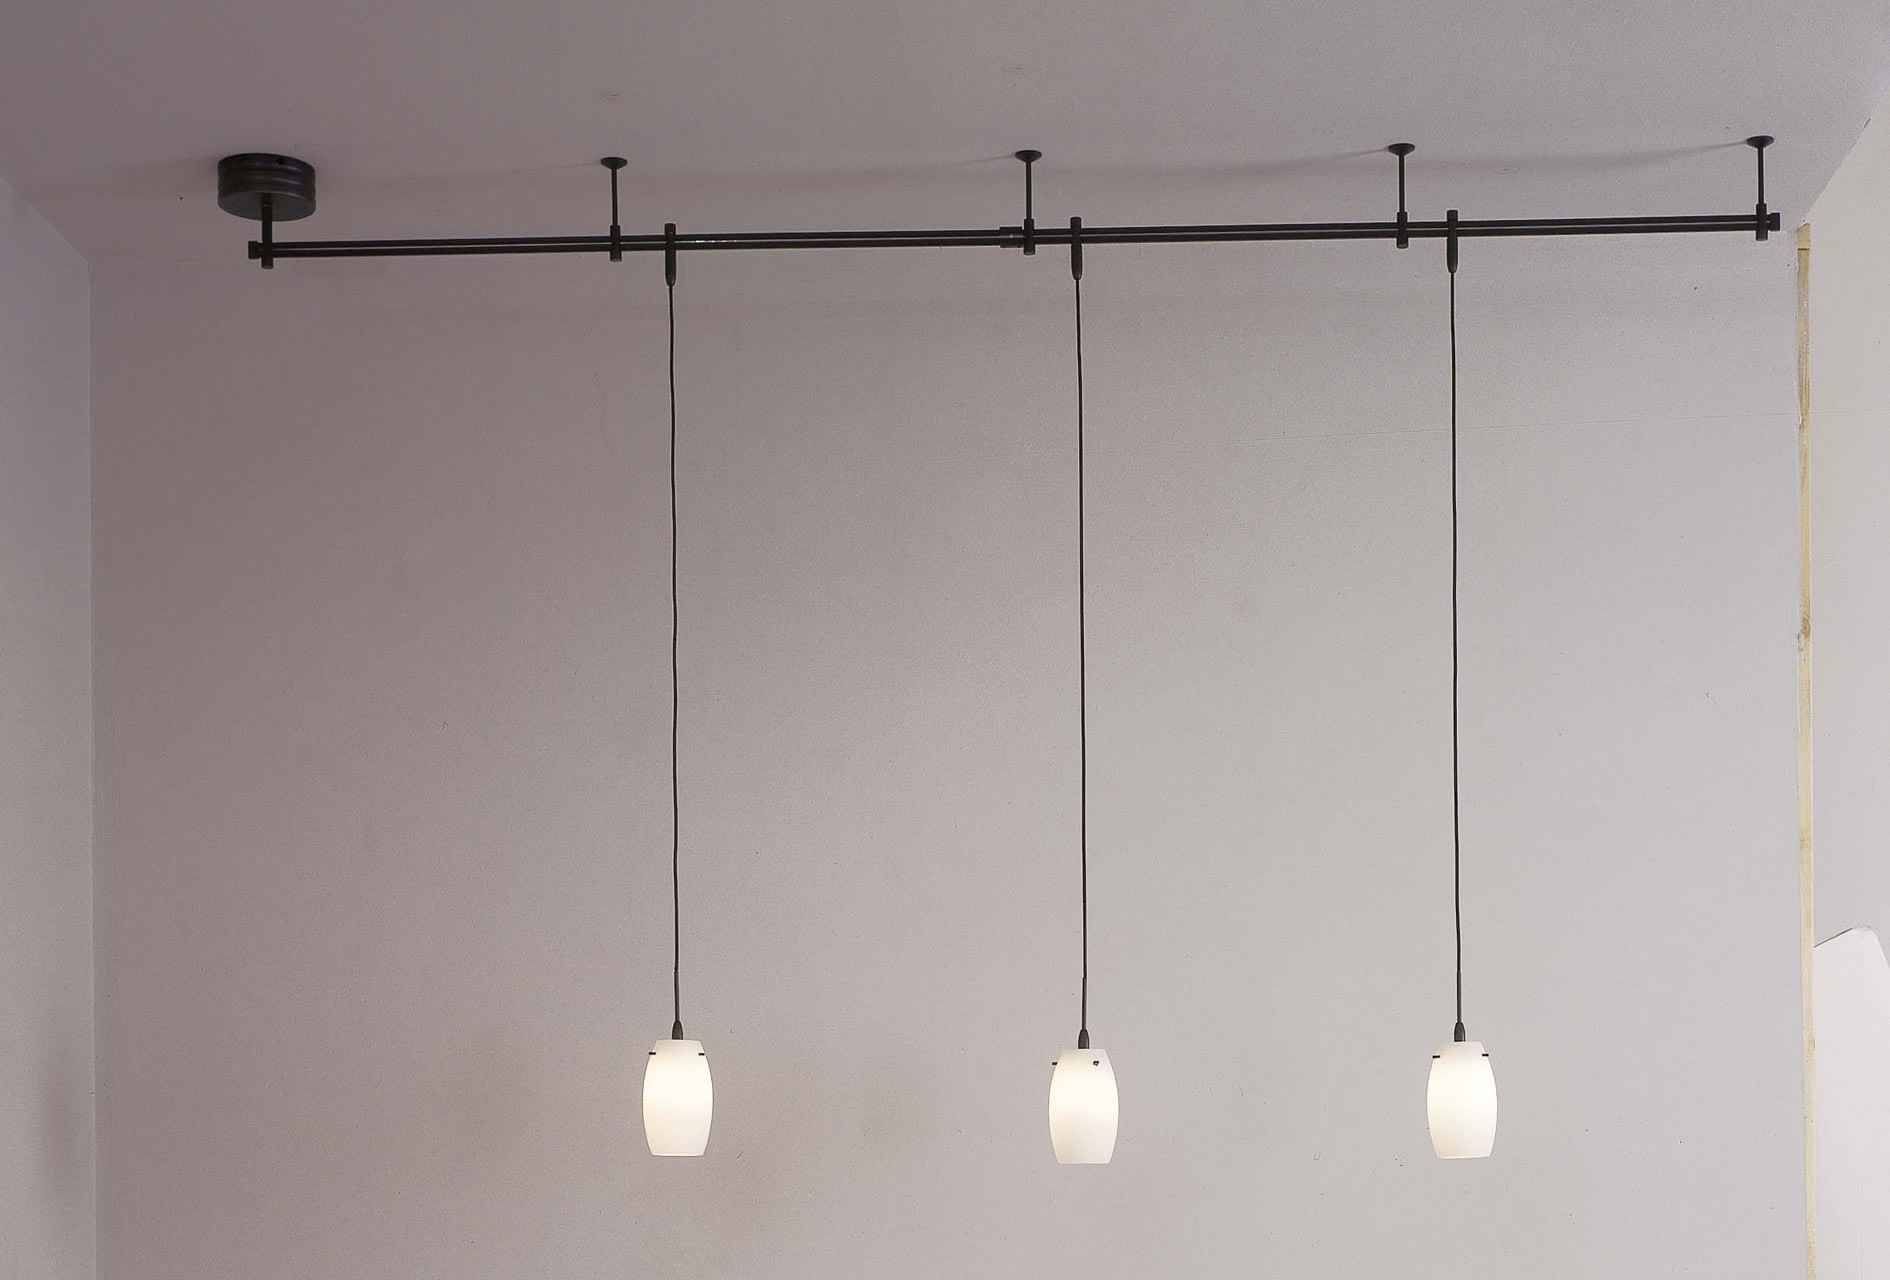 Pendant Lighting For Track Systems – Tomic Arms Within Pendant Lighting For Track Systems (View 2 of 15)